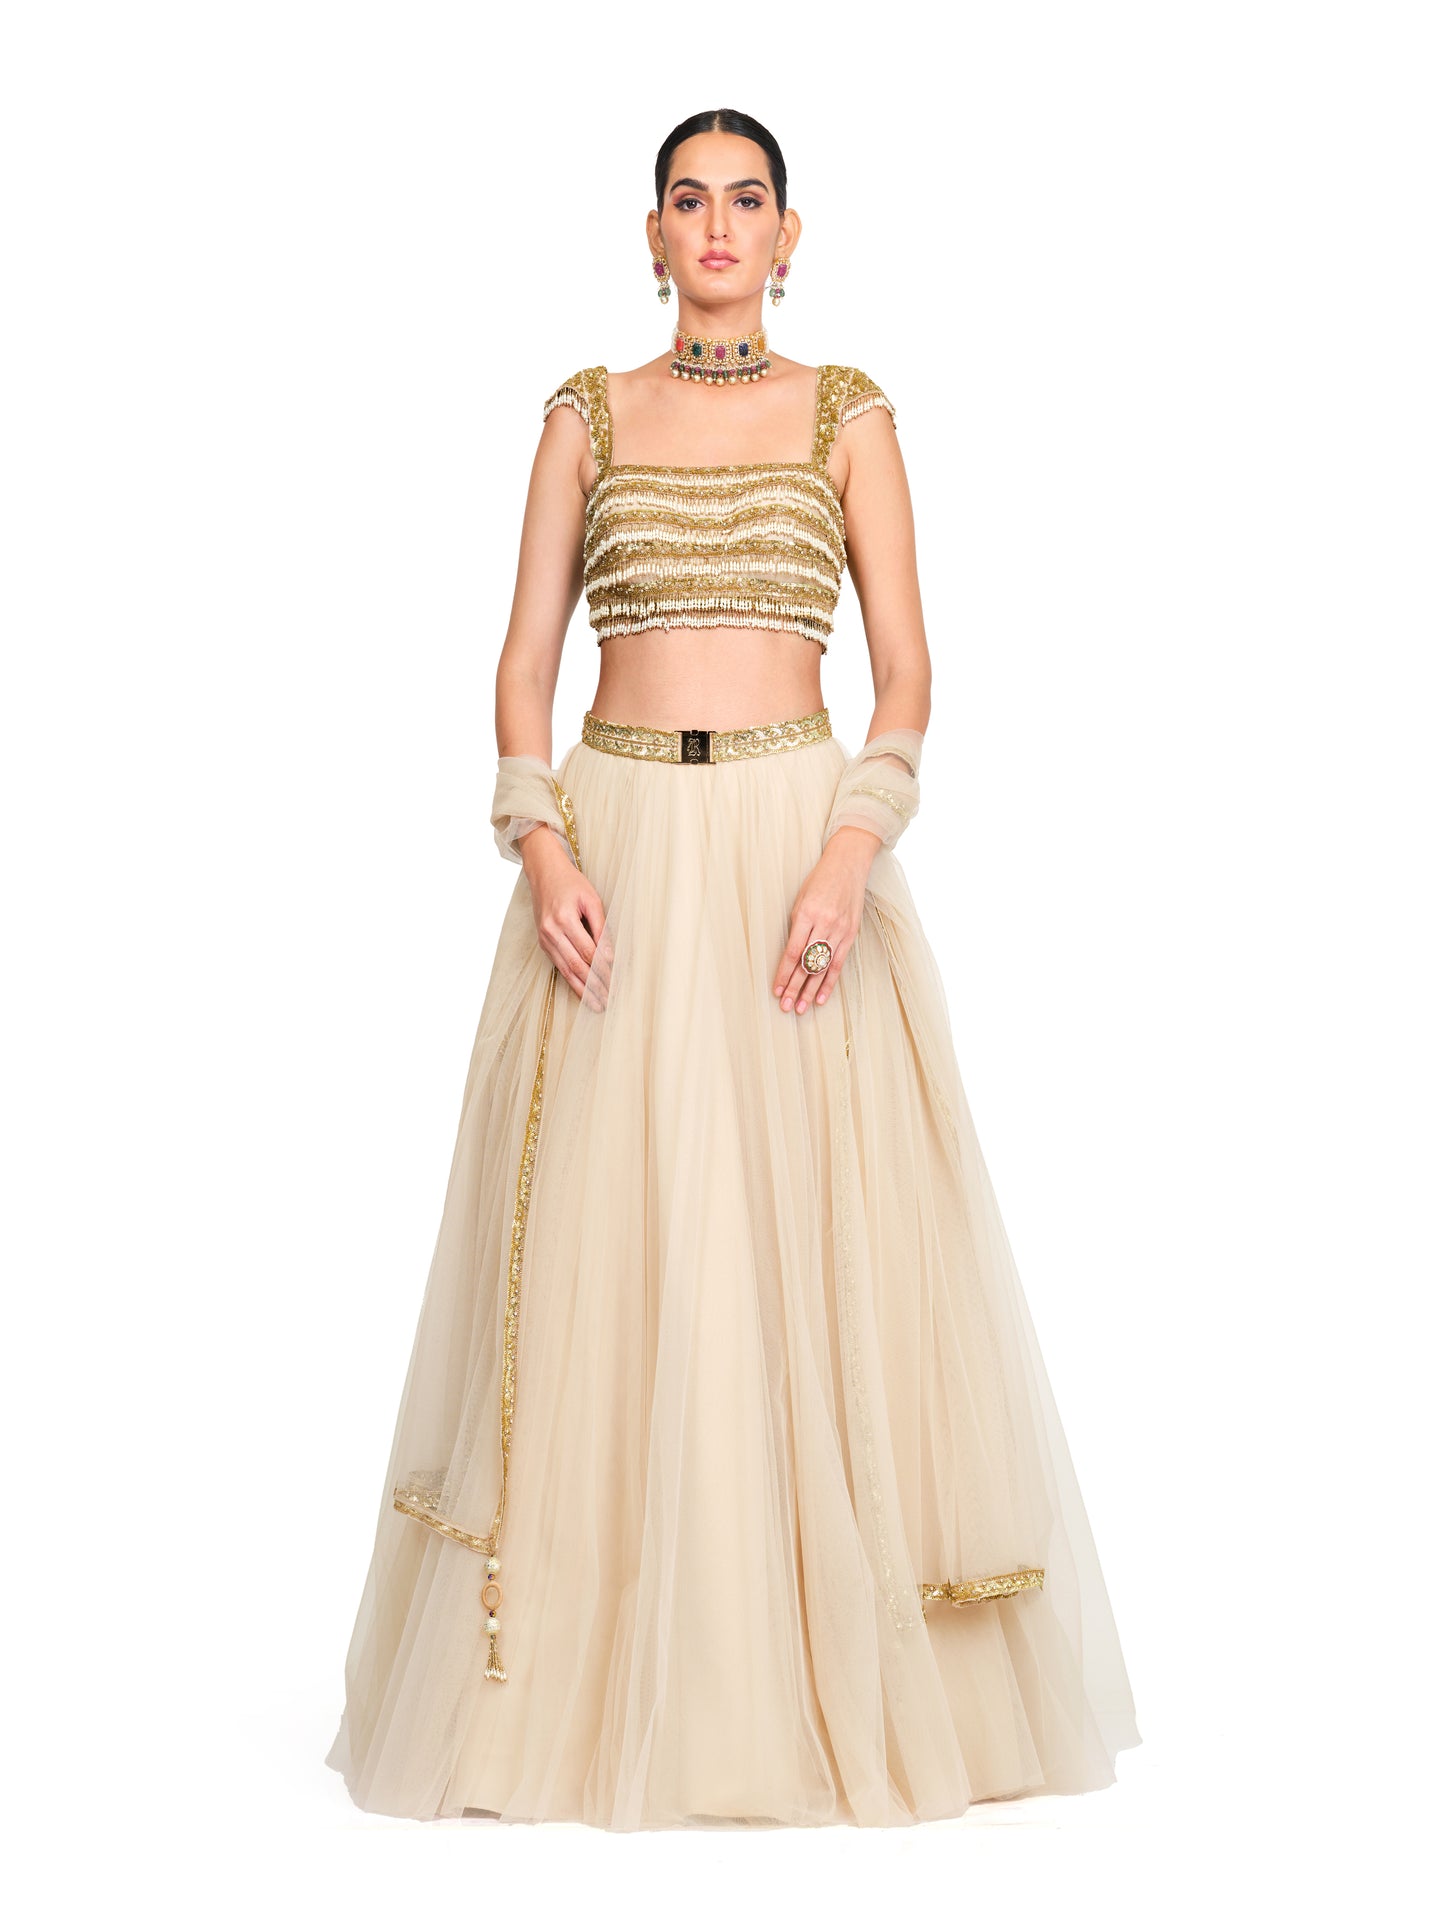 Tulle Lehenga with Tassel Strapped Bloused